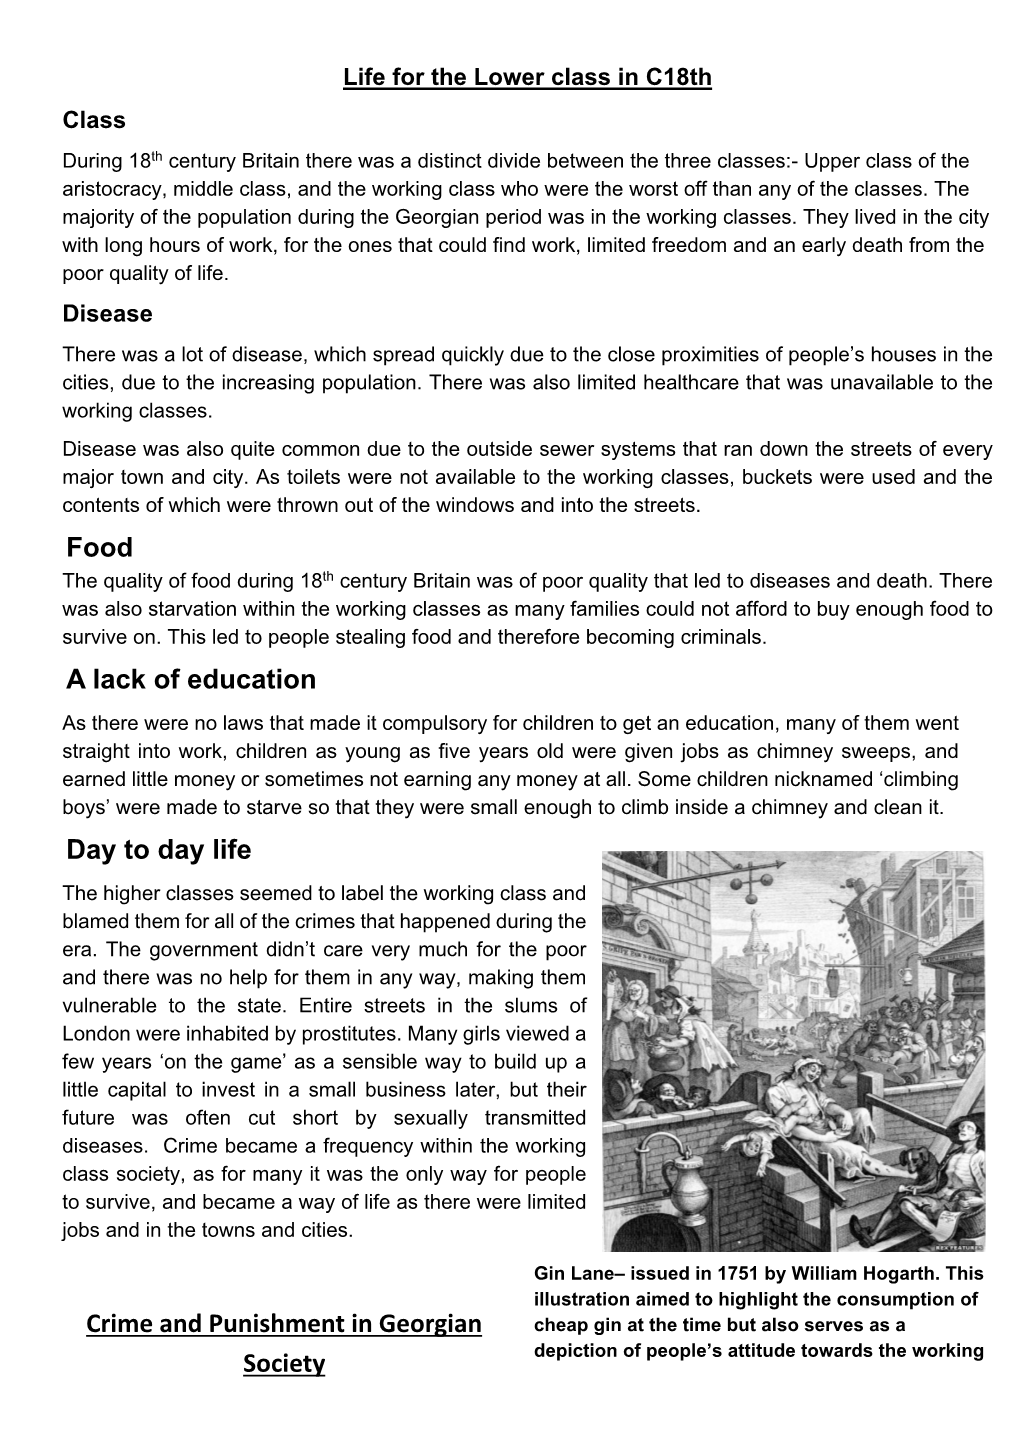 Food a Lack of Education Day to Day Life Crime and Punishment in Georgian Society